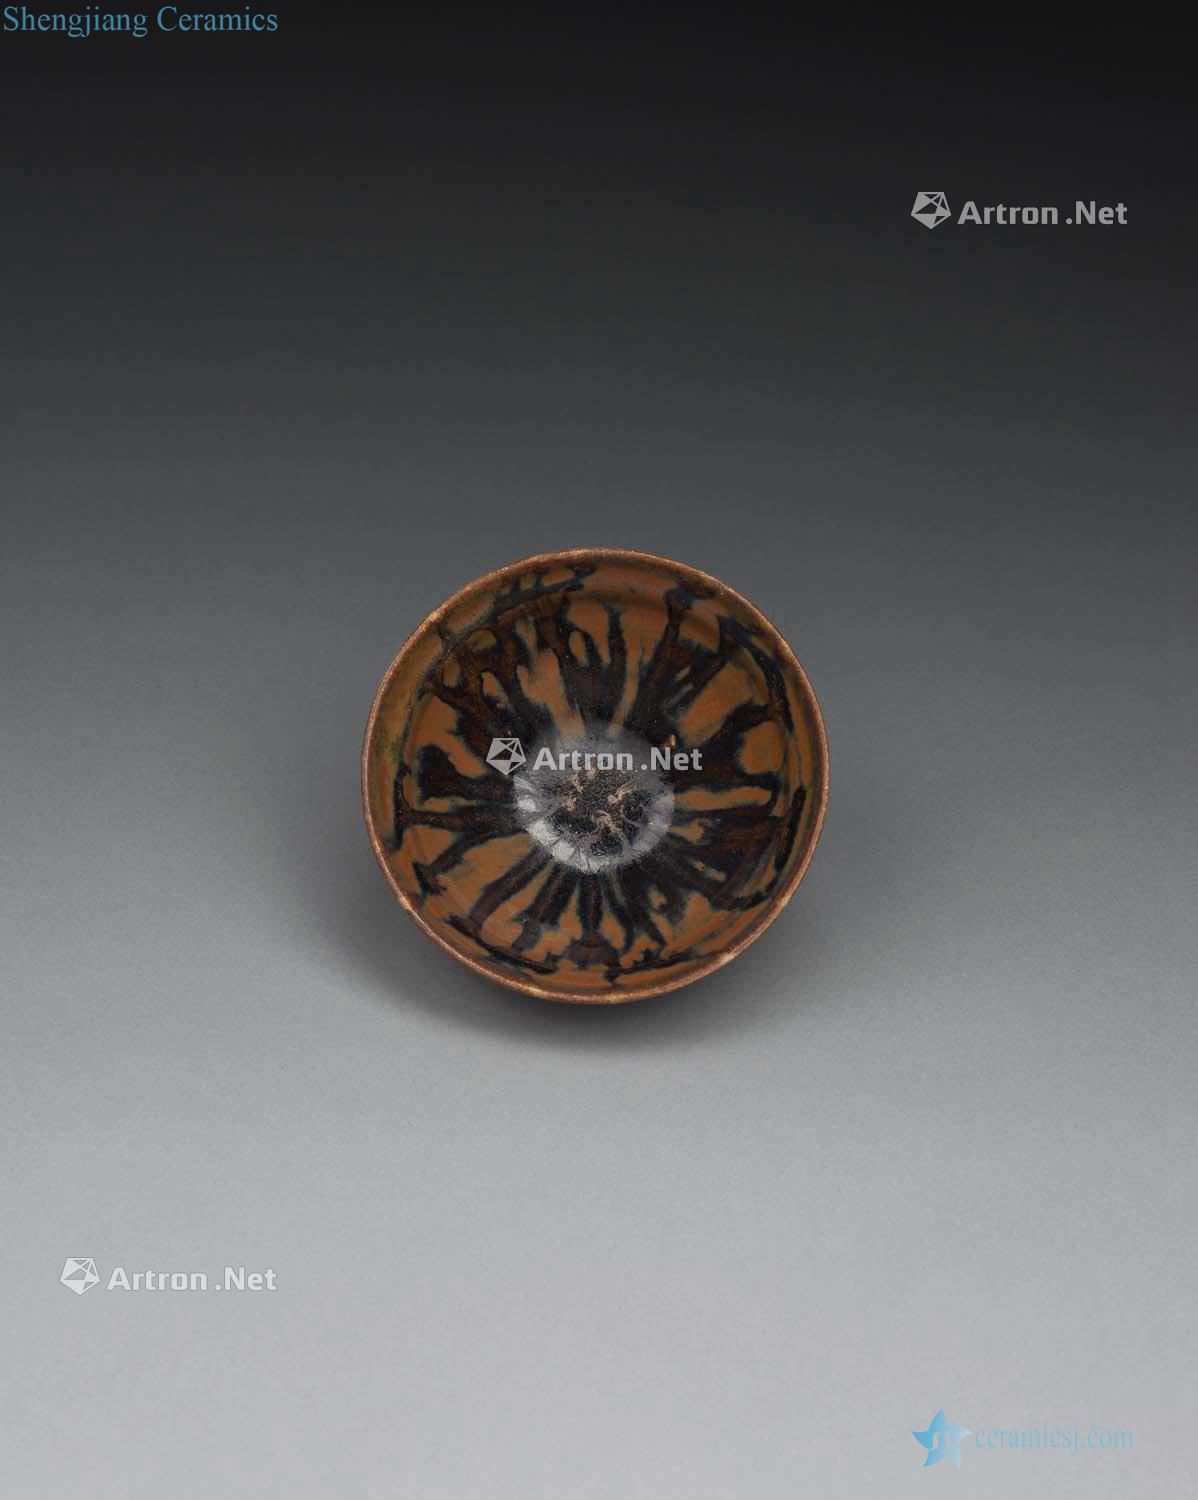 The song dynasty Sichuan black glazed bowl iron rust stain